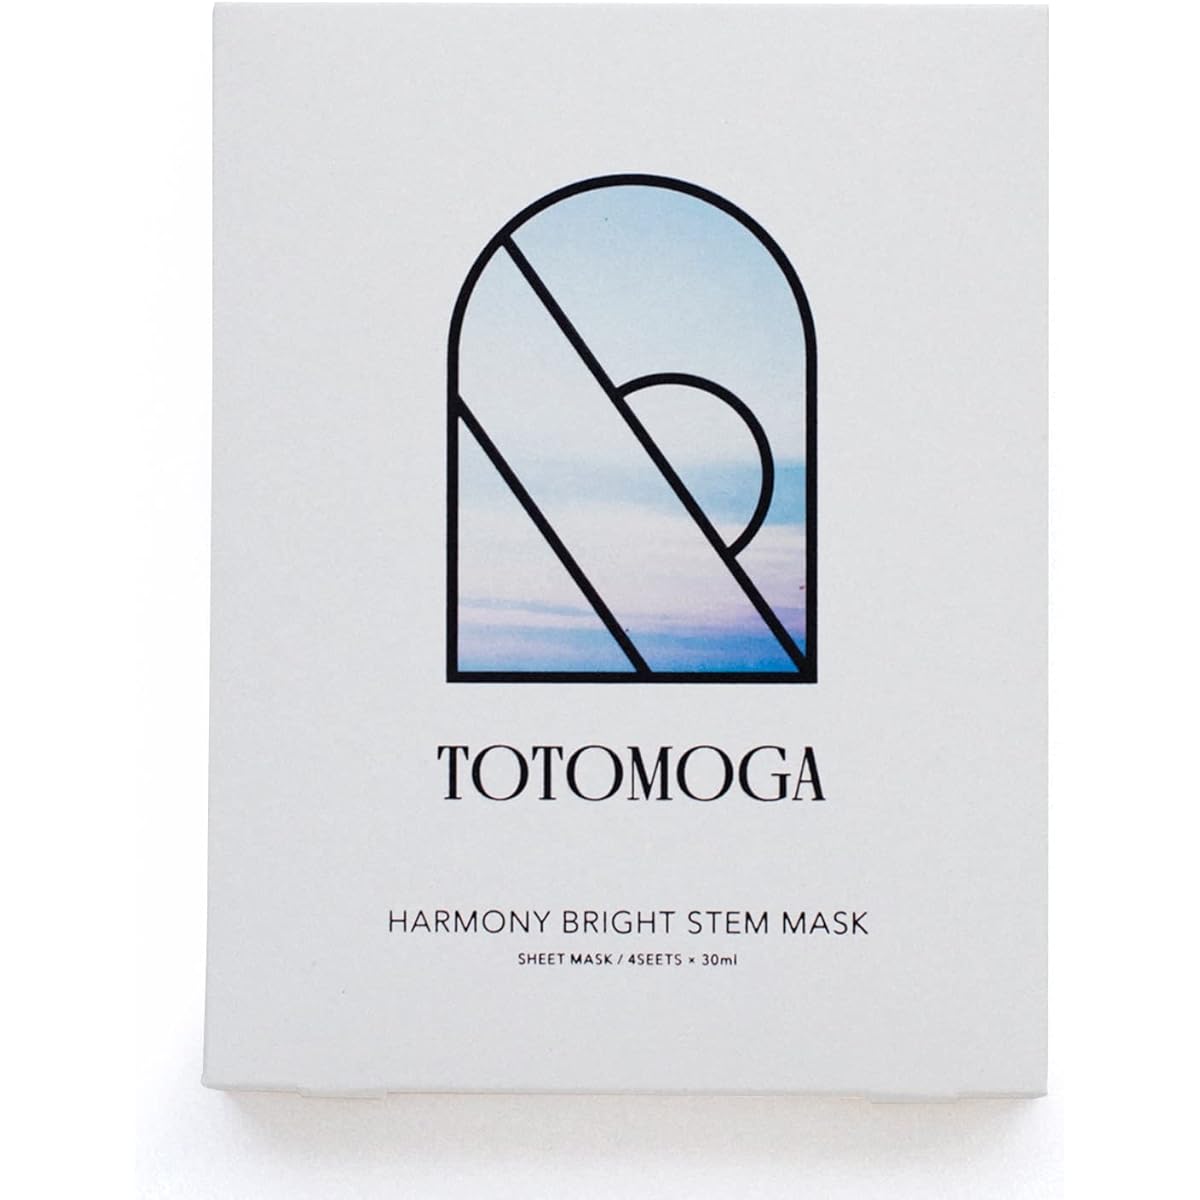 TOTOMOGA High-performance face mask / Human stem cell culture solution combination / International patented penetration technology / Highly moisturizing and moisturizing skin / 1 box of 4 masks (30ml x 4 doses)